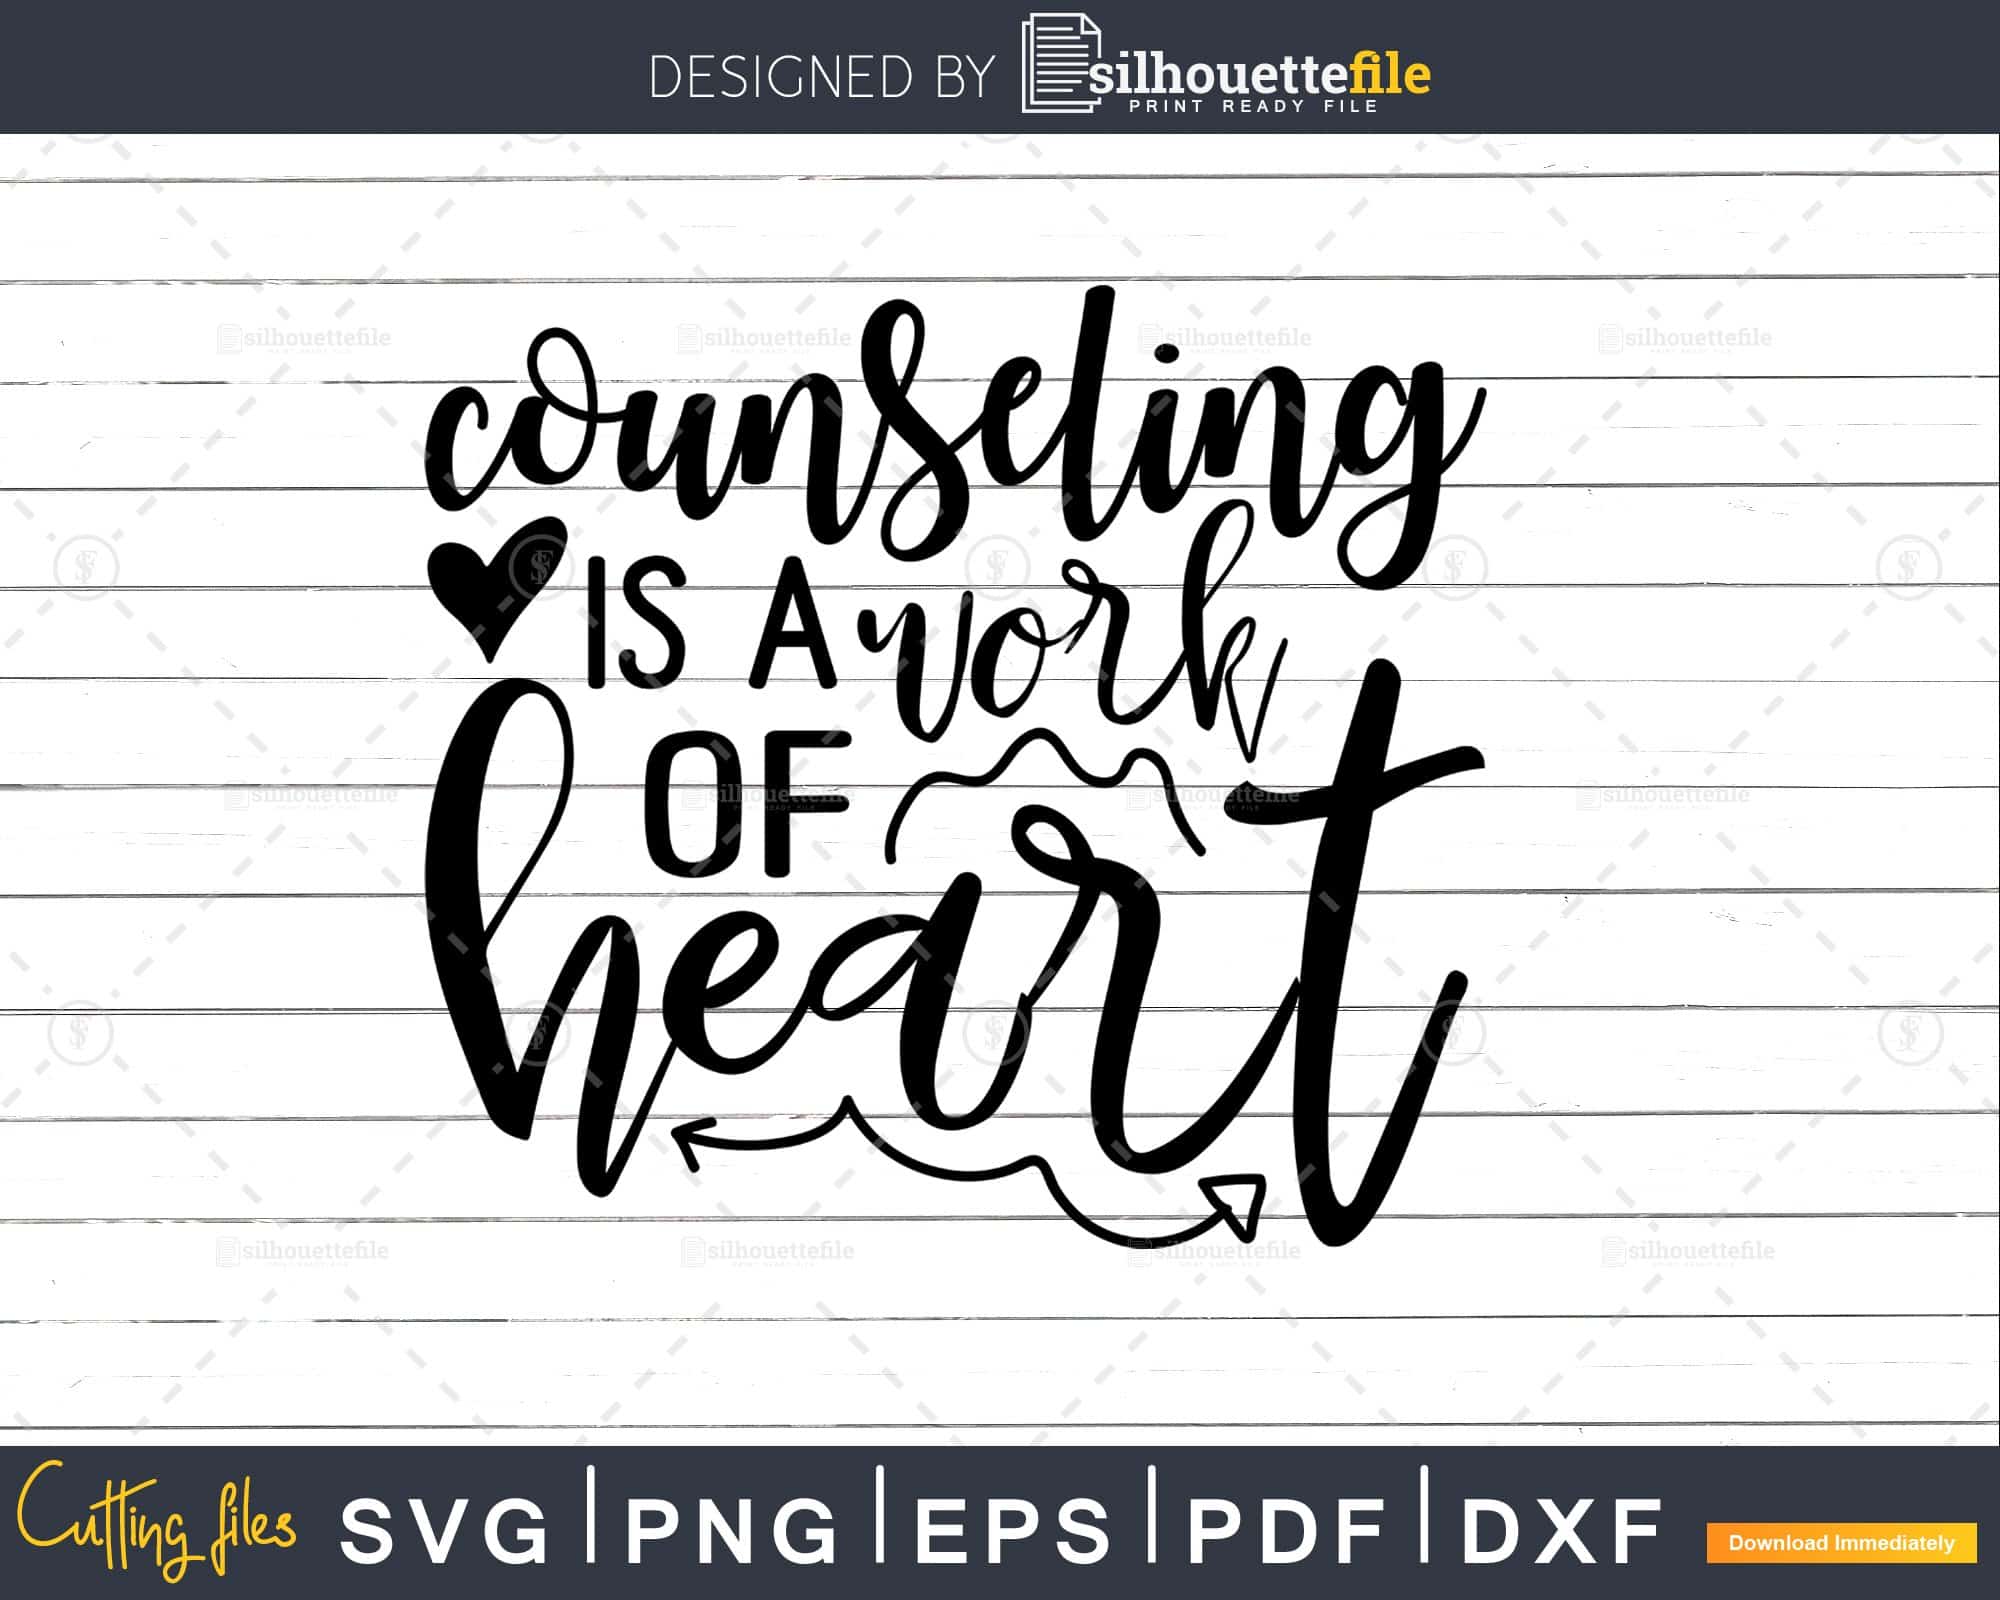 Home is Where the Heart Is SVG, Family SVG, Family quote,Home Decor Svg,  Png, Eps, Dxf, Cricut, Cut Files, Silhouette Files, Download, Print